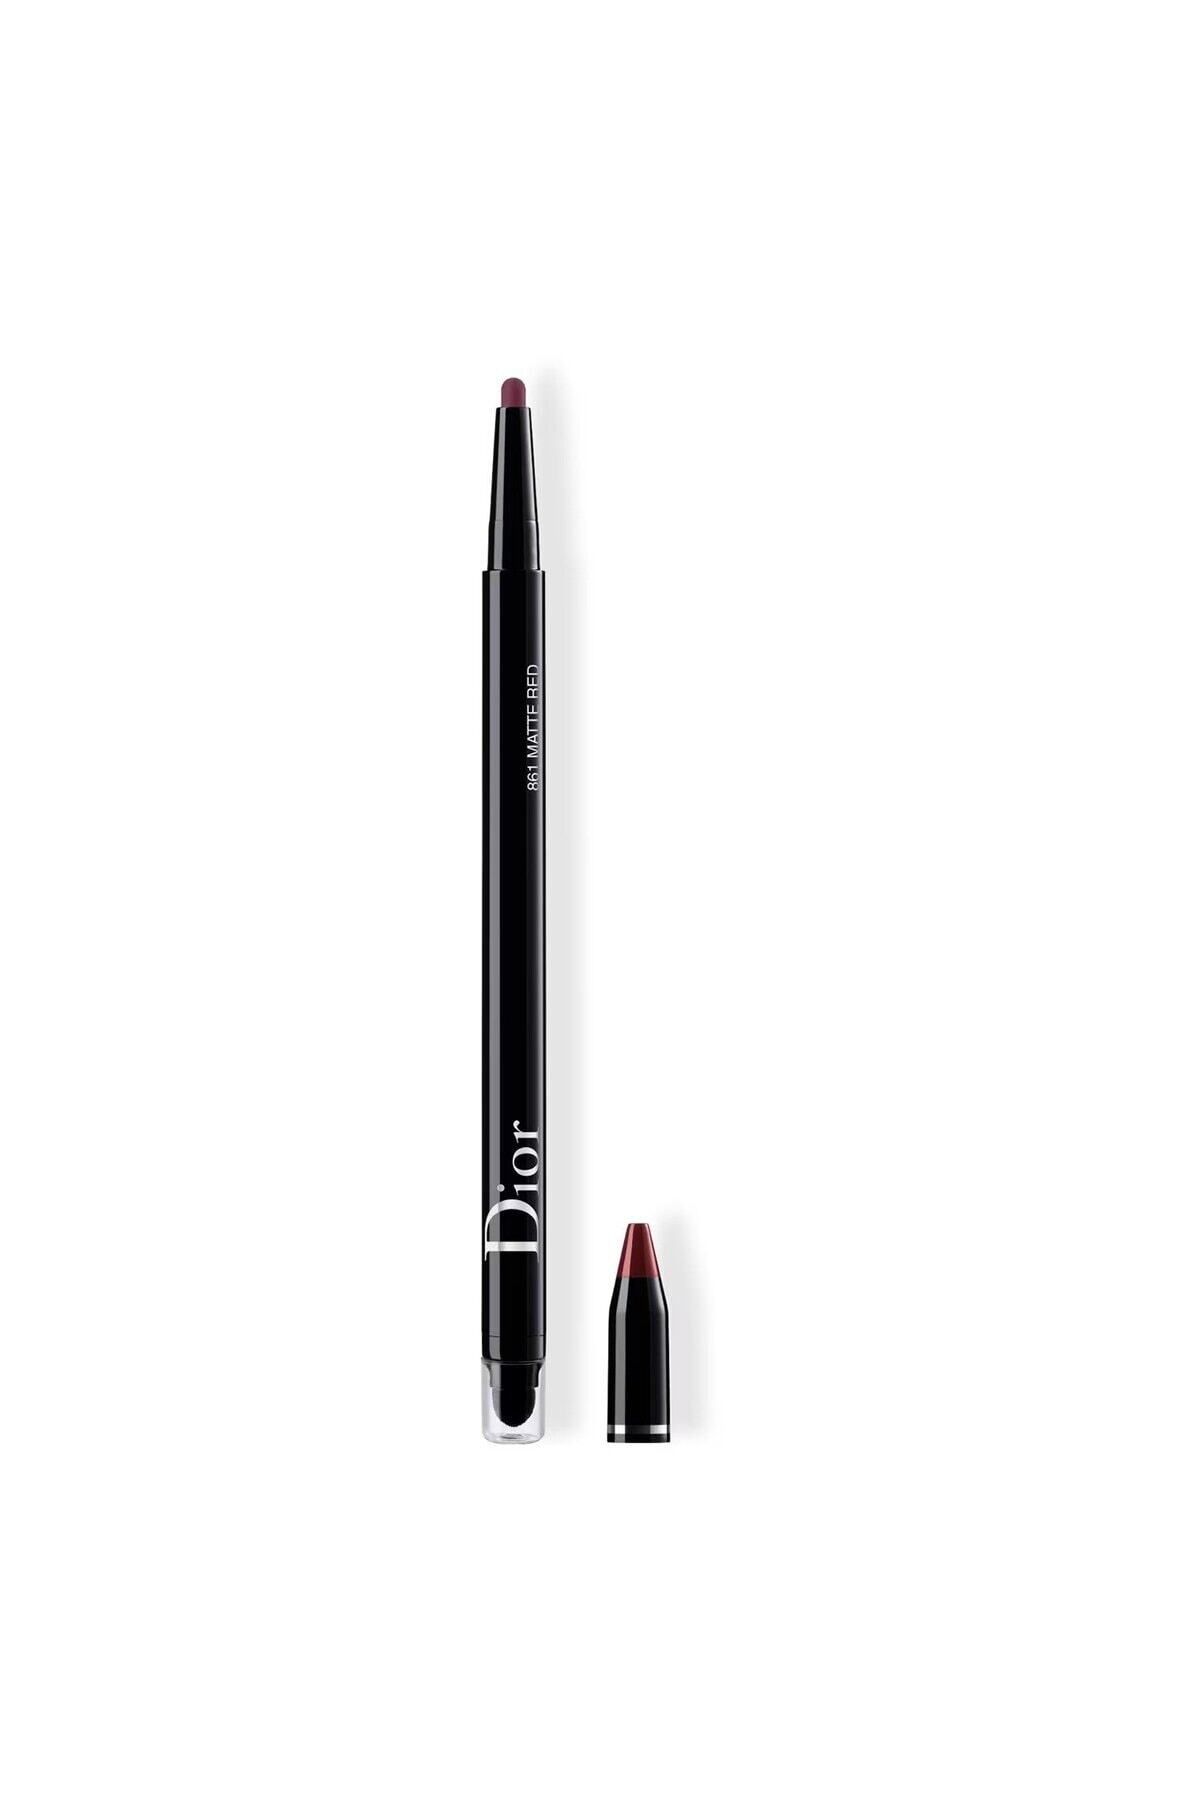 Dior DİORSHOW 24H* STYLO WATERPROOF - 24 HOUR LASTİNG AND HİGH INTENSİTY APPEARANCE EYELİNER PSSN1951